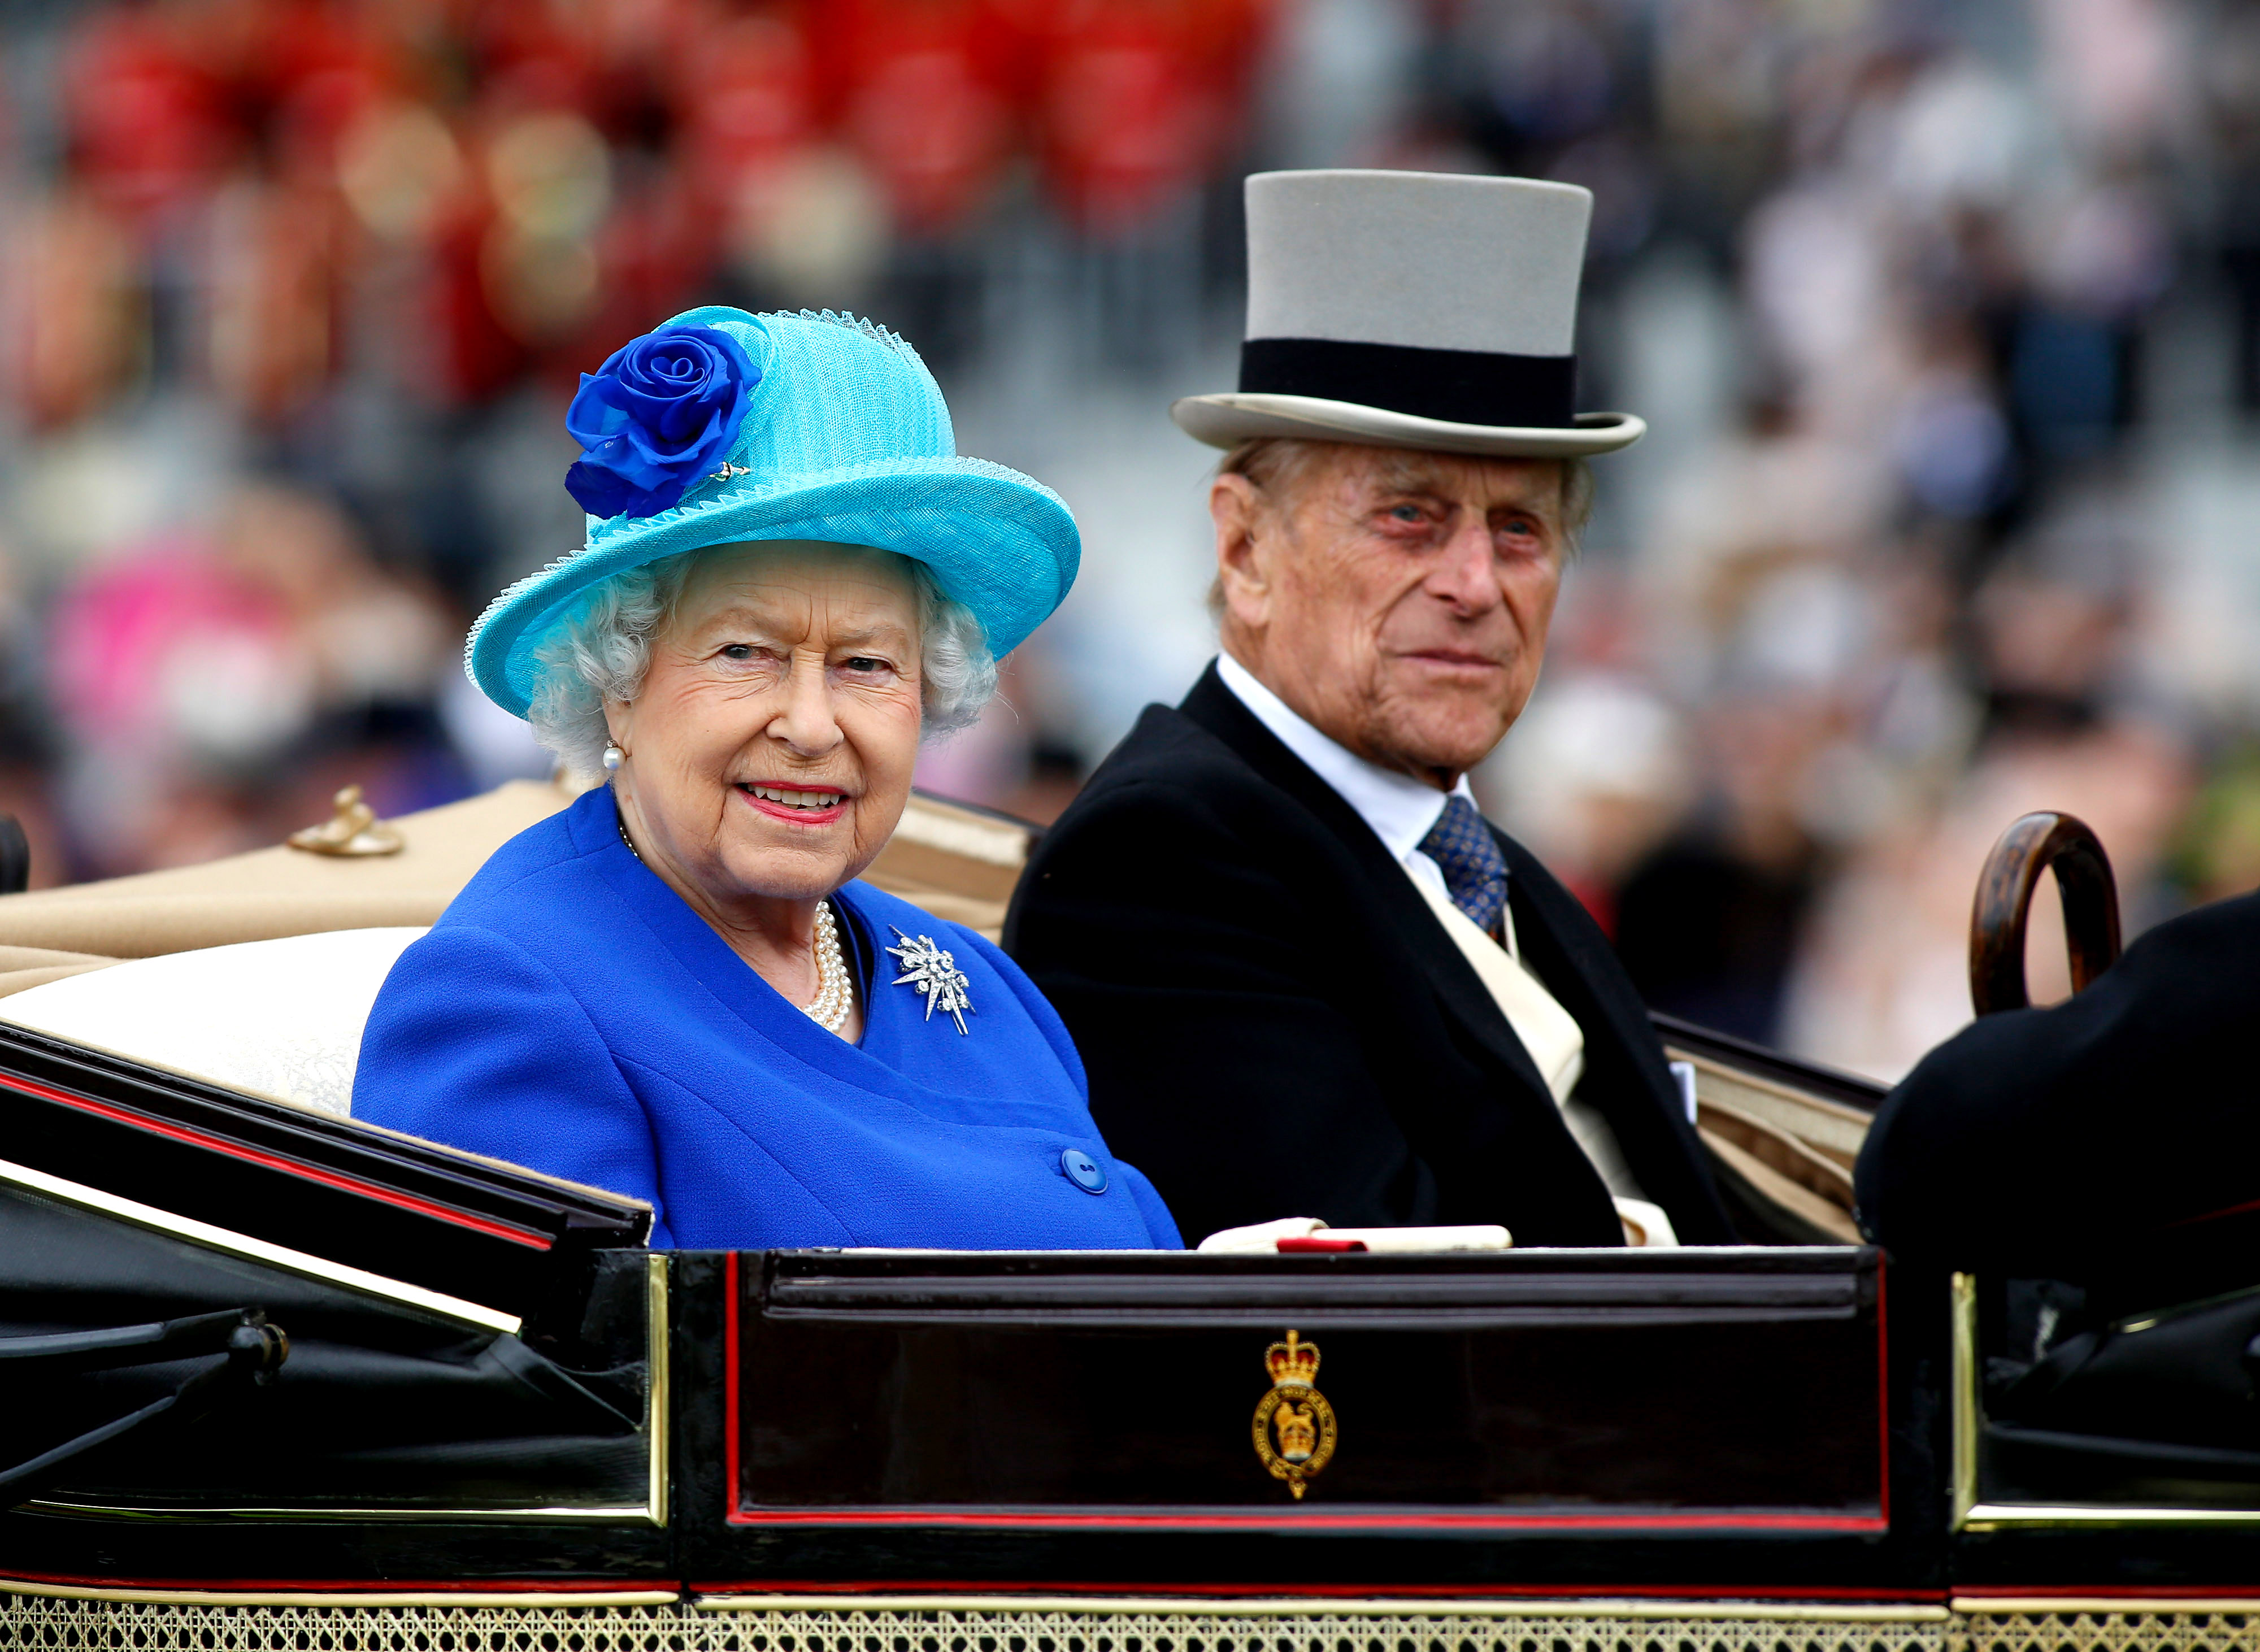 ASCOT, ENGLAND - JUNE 18: Queen Elizabeth II and Prince Philip, Duke of Edinburgh take part in the carriage procession during Day Five of Royal Ascot at Ascot Racecourse on June 18, 2016 in Ascot, England. (Photo by Julian Herbert/Getty Images)